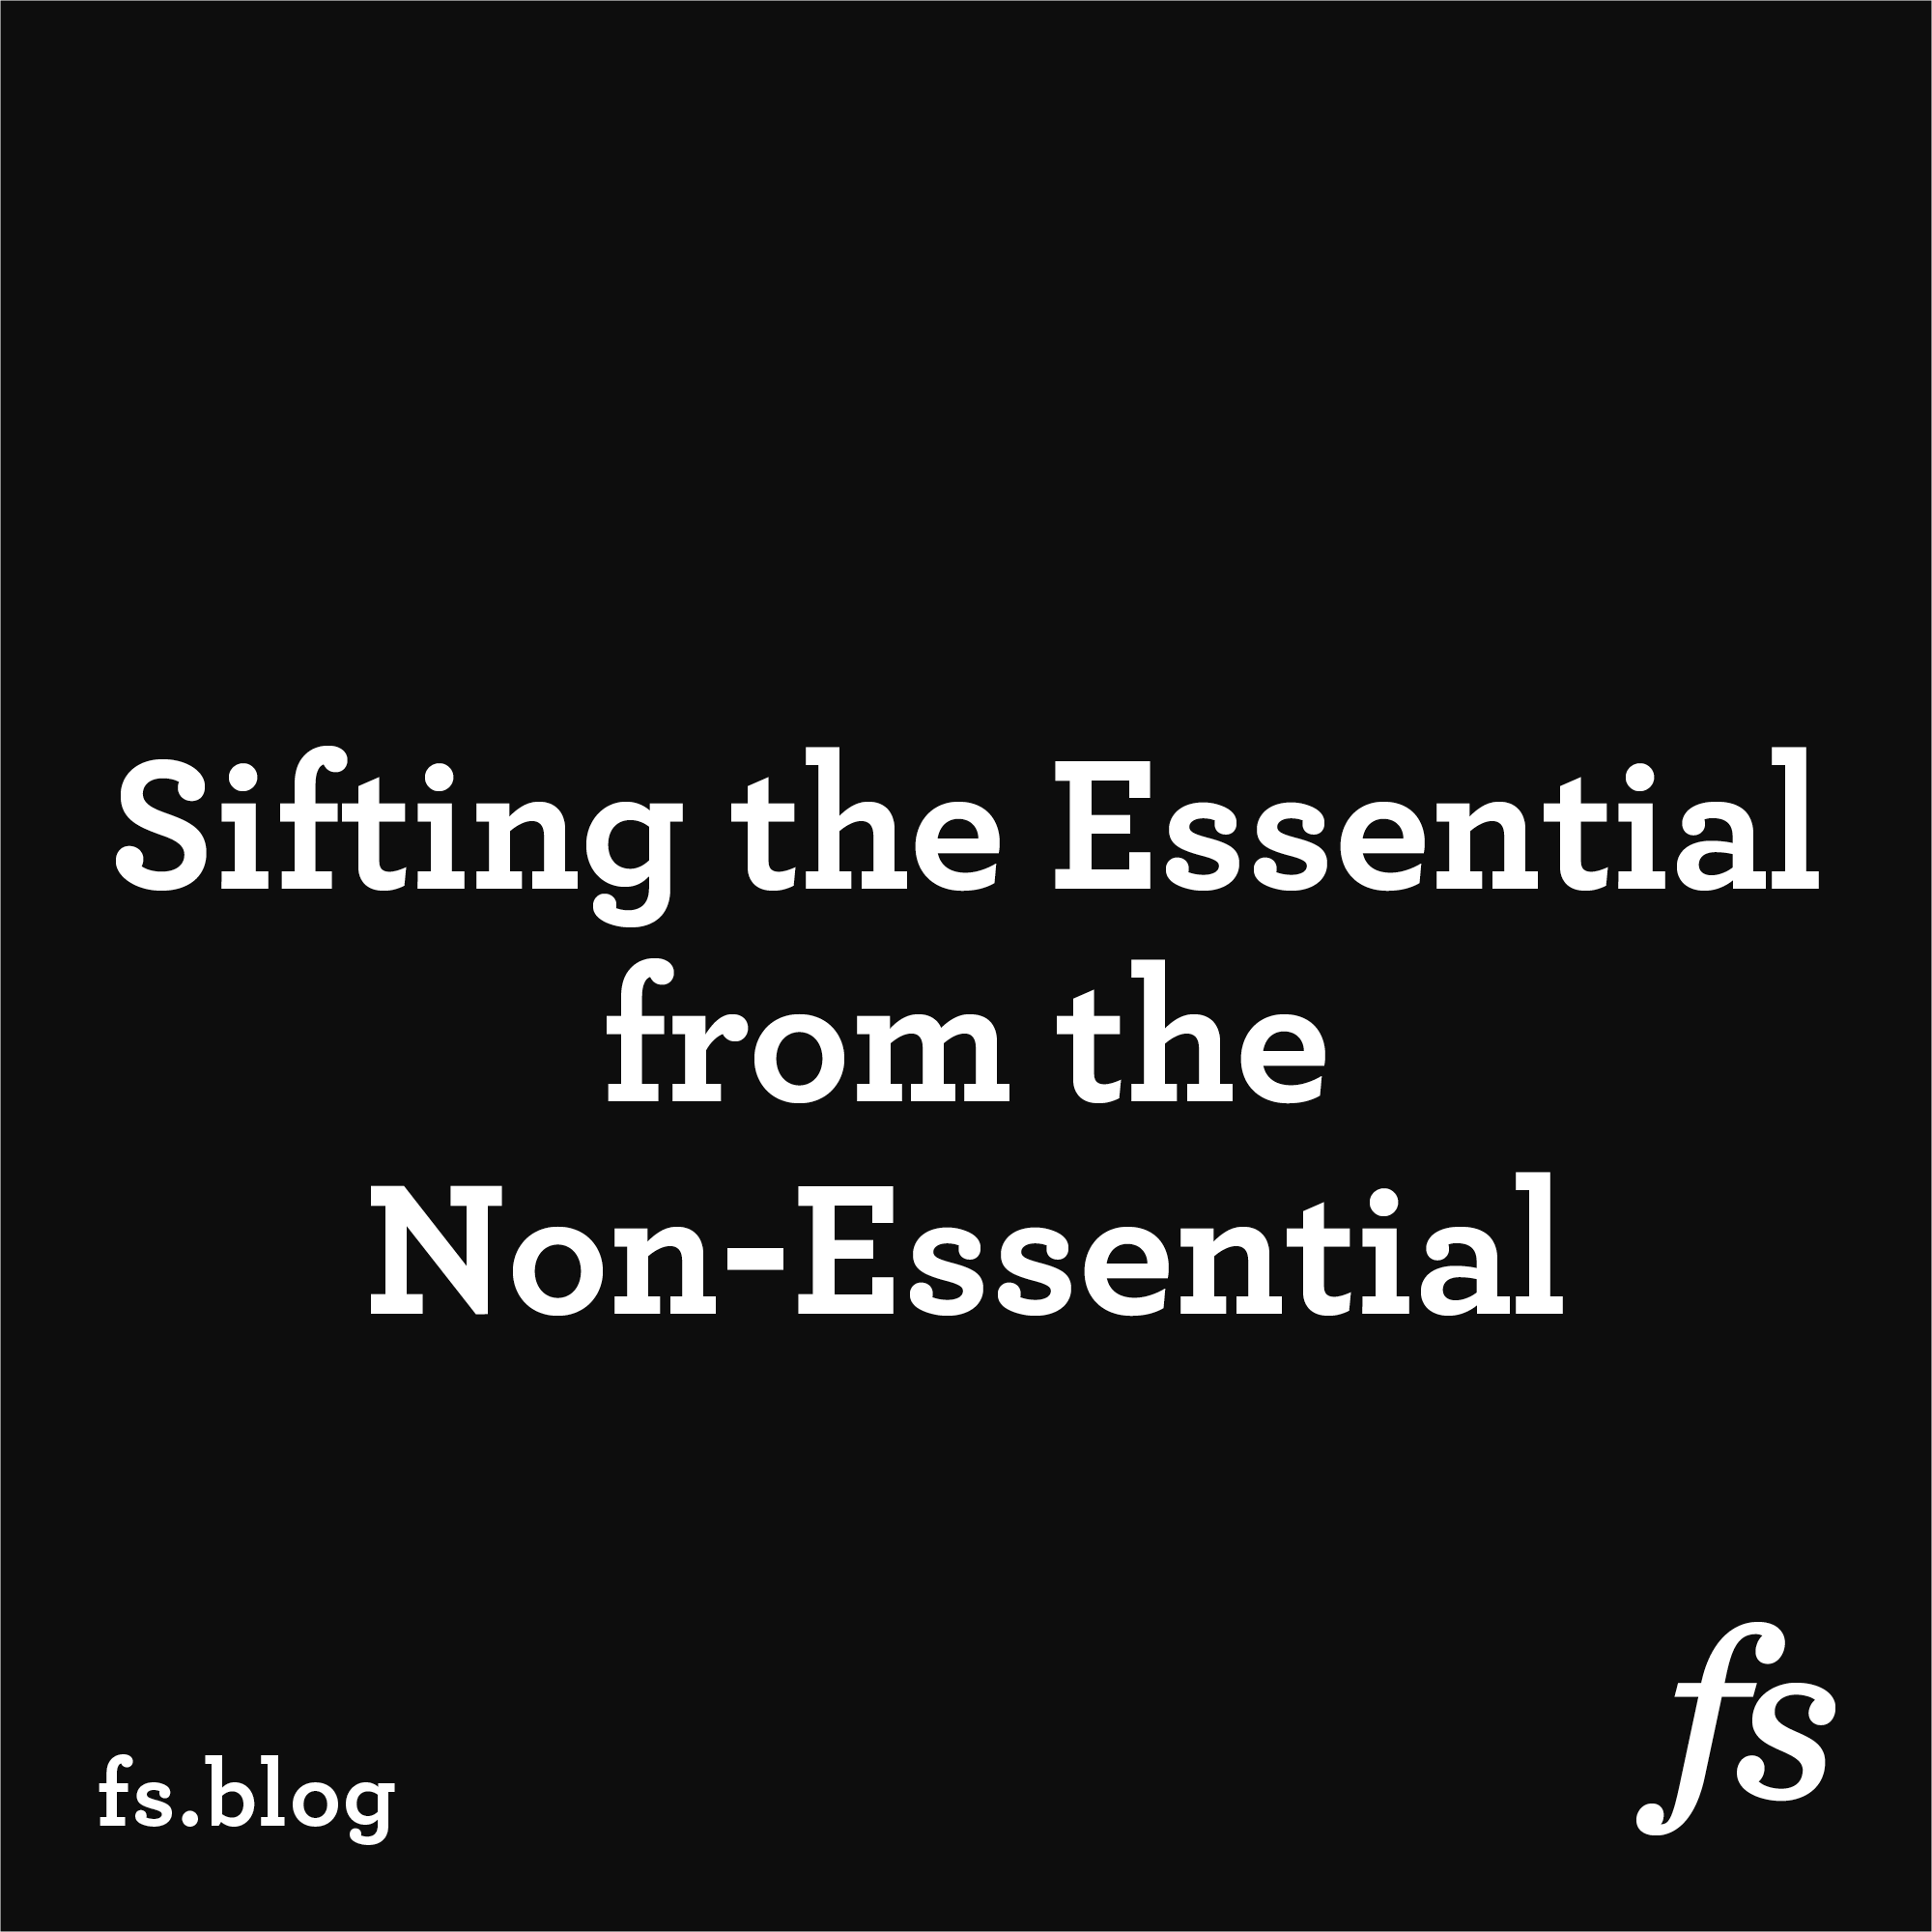 Albert Einstein On Sifting The Essential From The Non Essential